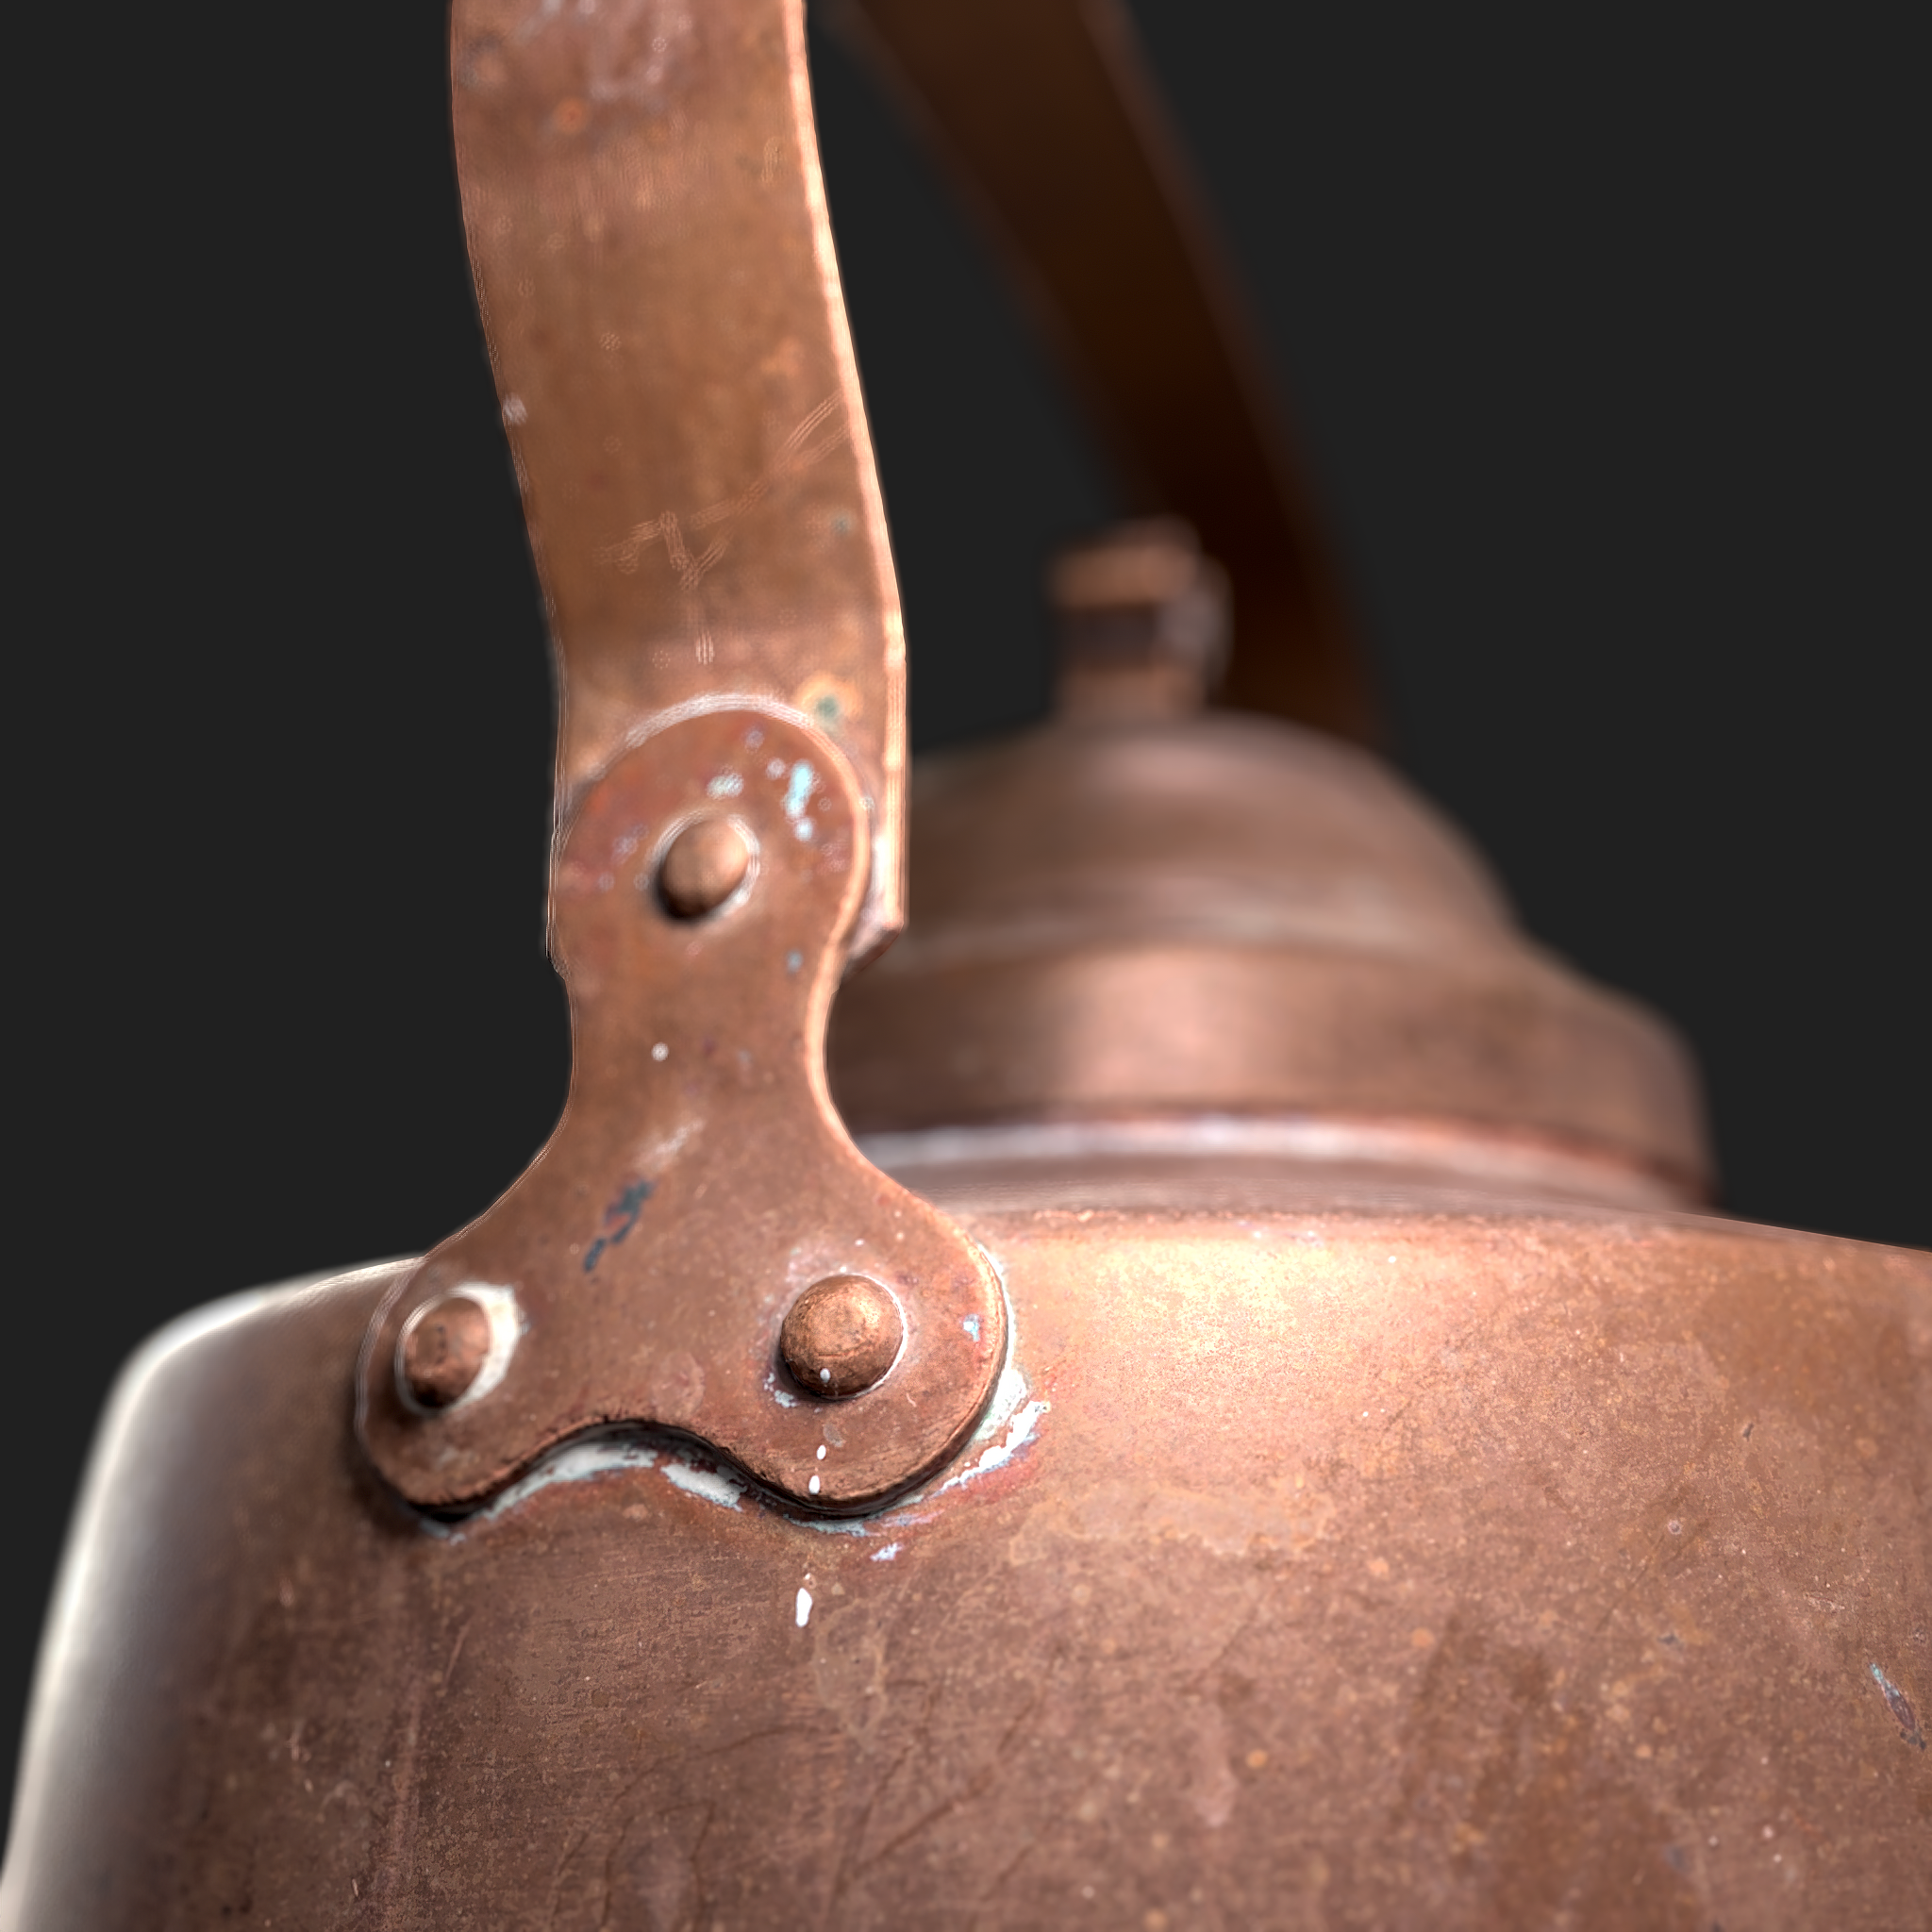 Copper Kettle - For FREE